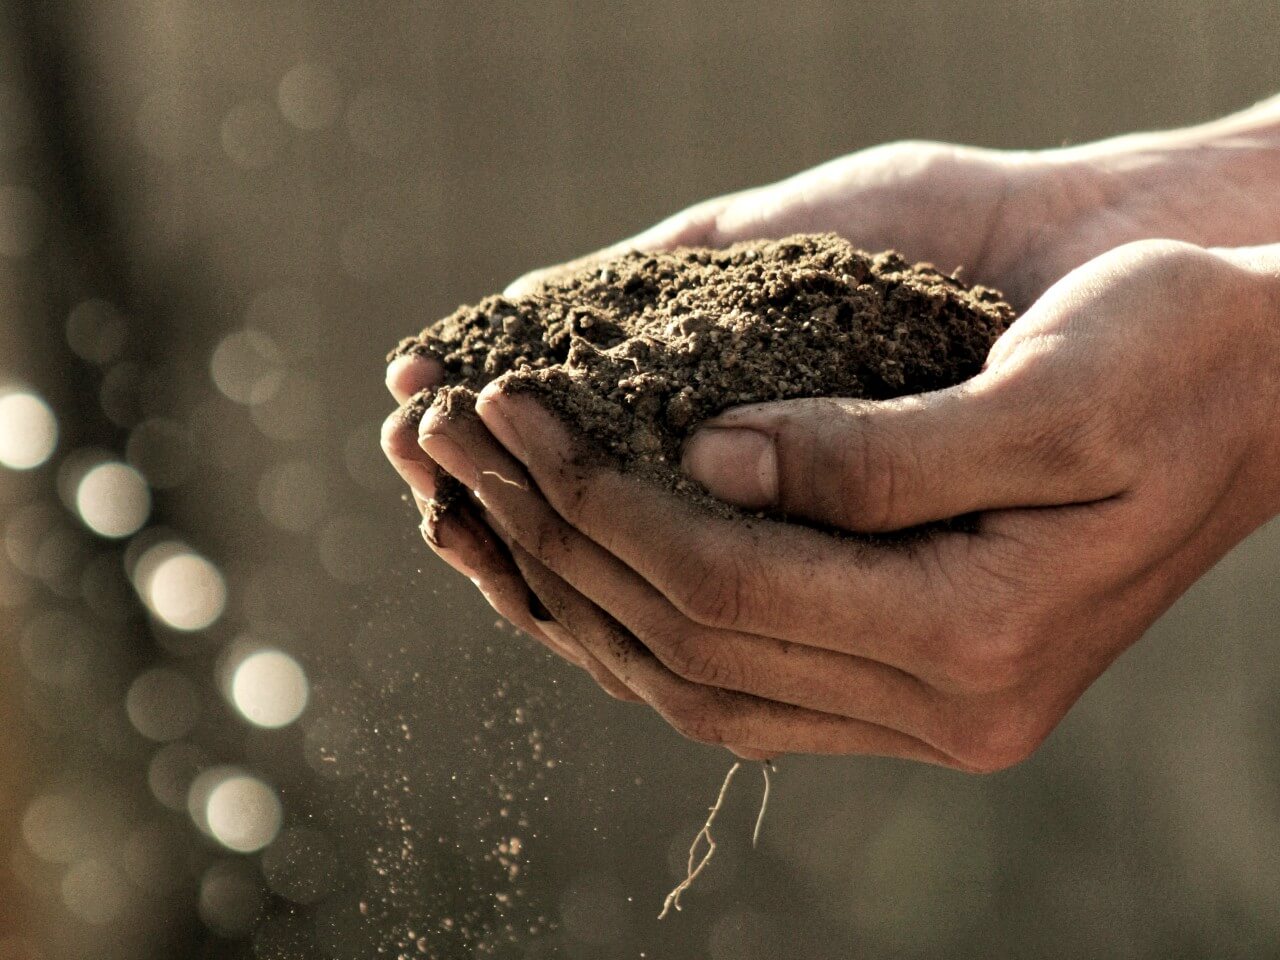 Hands holding a pile of dirt to show soil-based probiotics